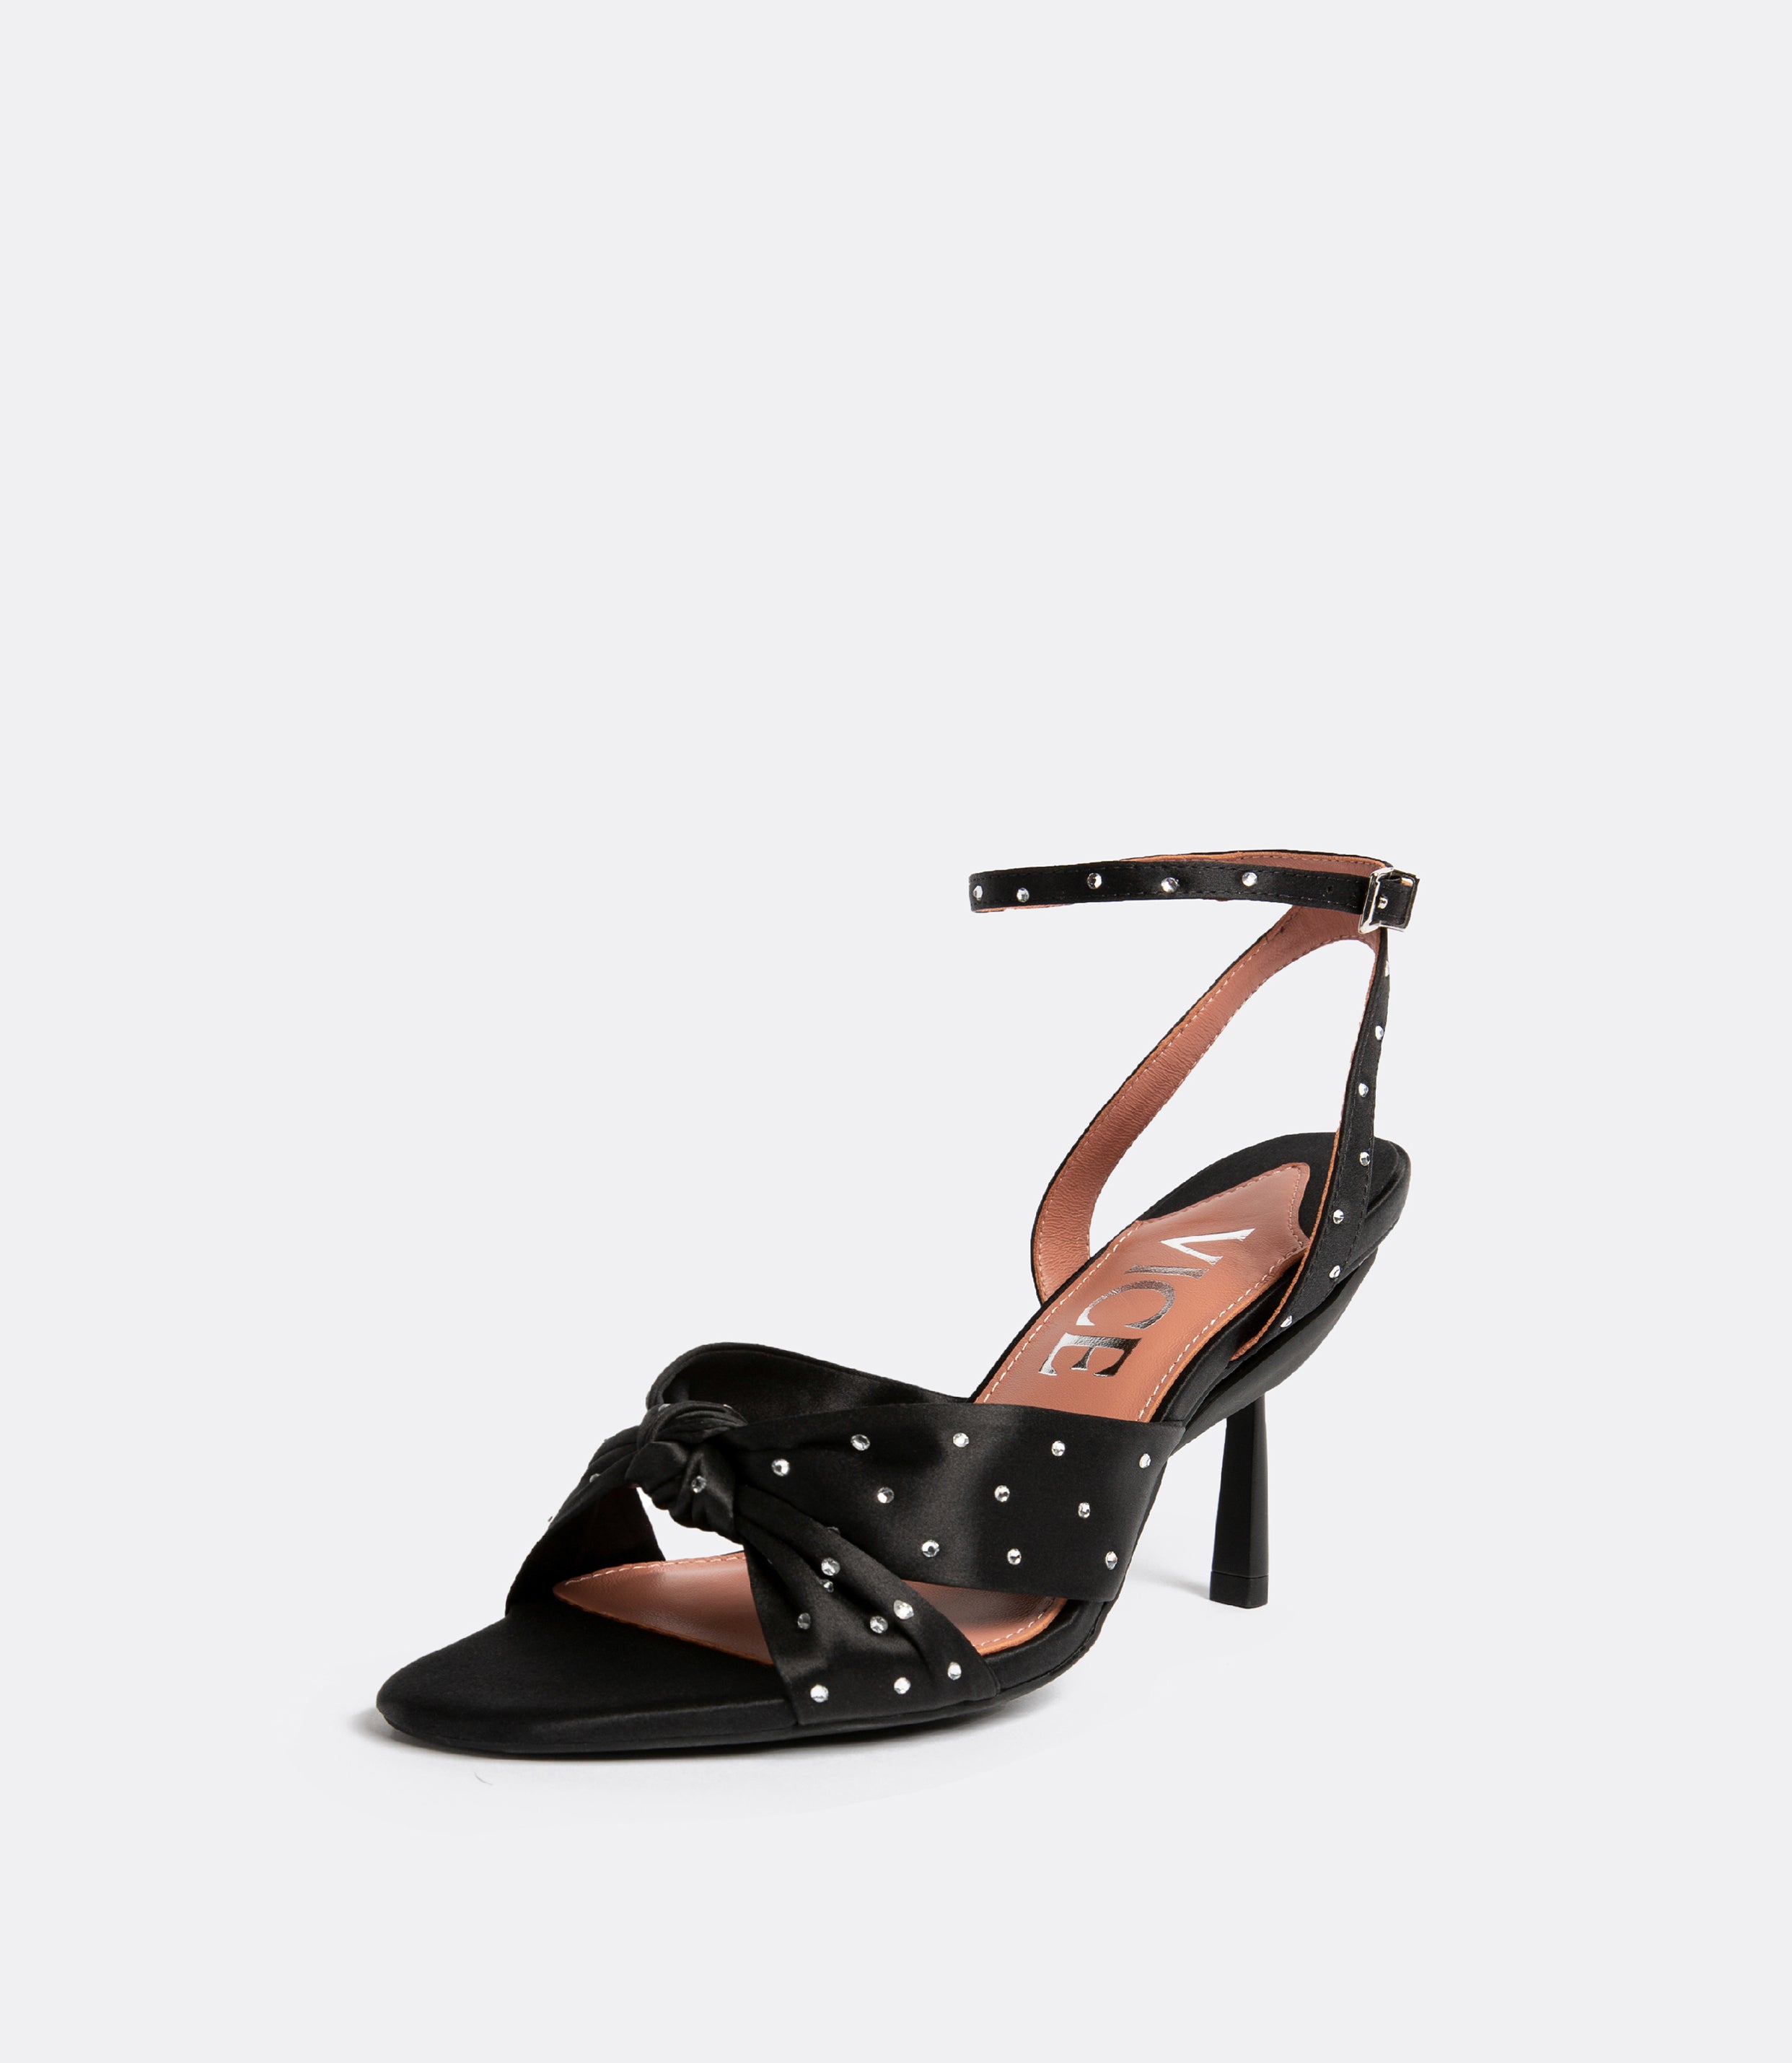 Front view of the black silk crystal sandal as a heel.